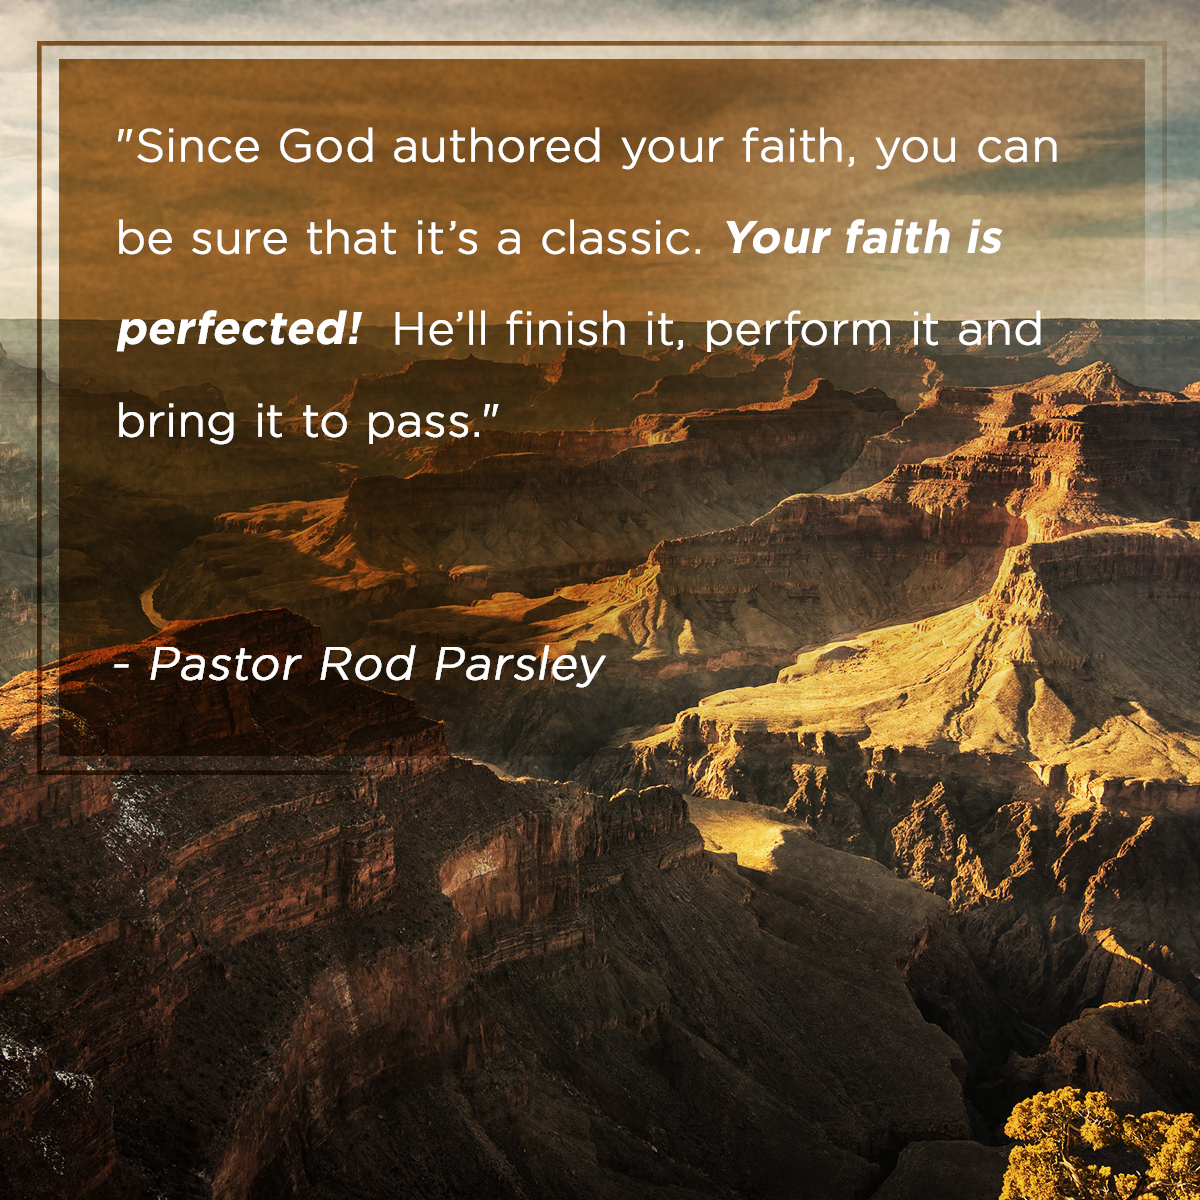 “Since God authored you faith, you can be sure that it’s a classic. Your faith is perfected! He’ll finish it, perform it and bring it to pass.” – Pastor Rod Parsley